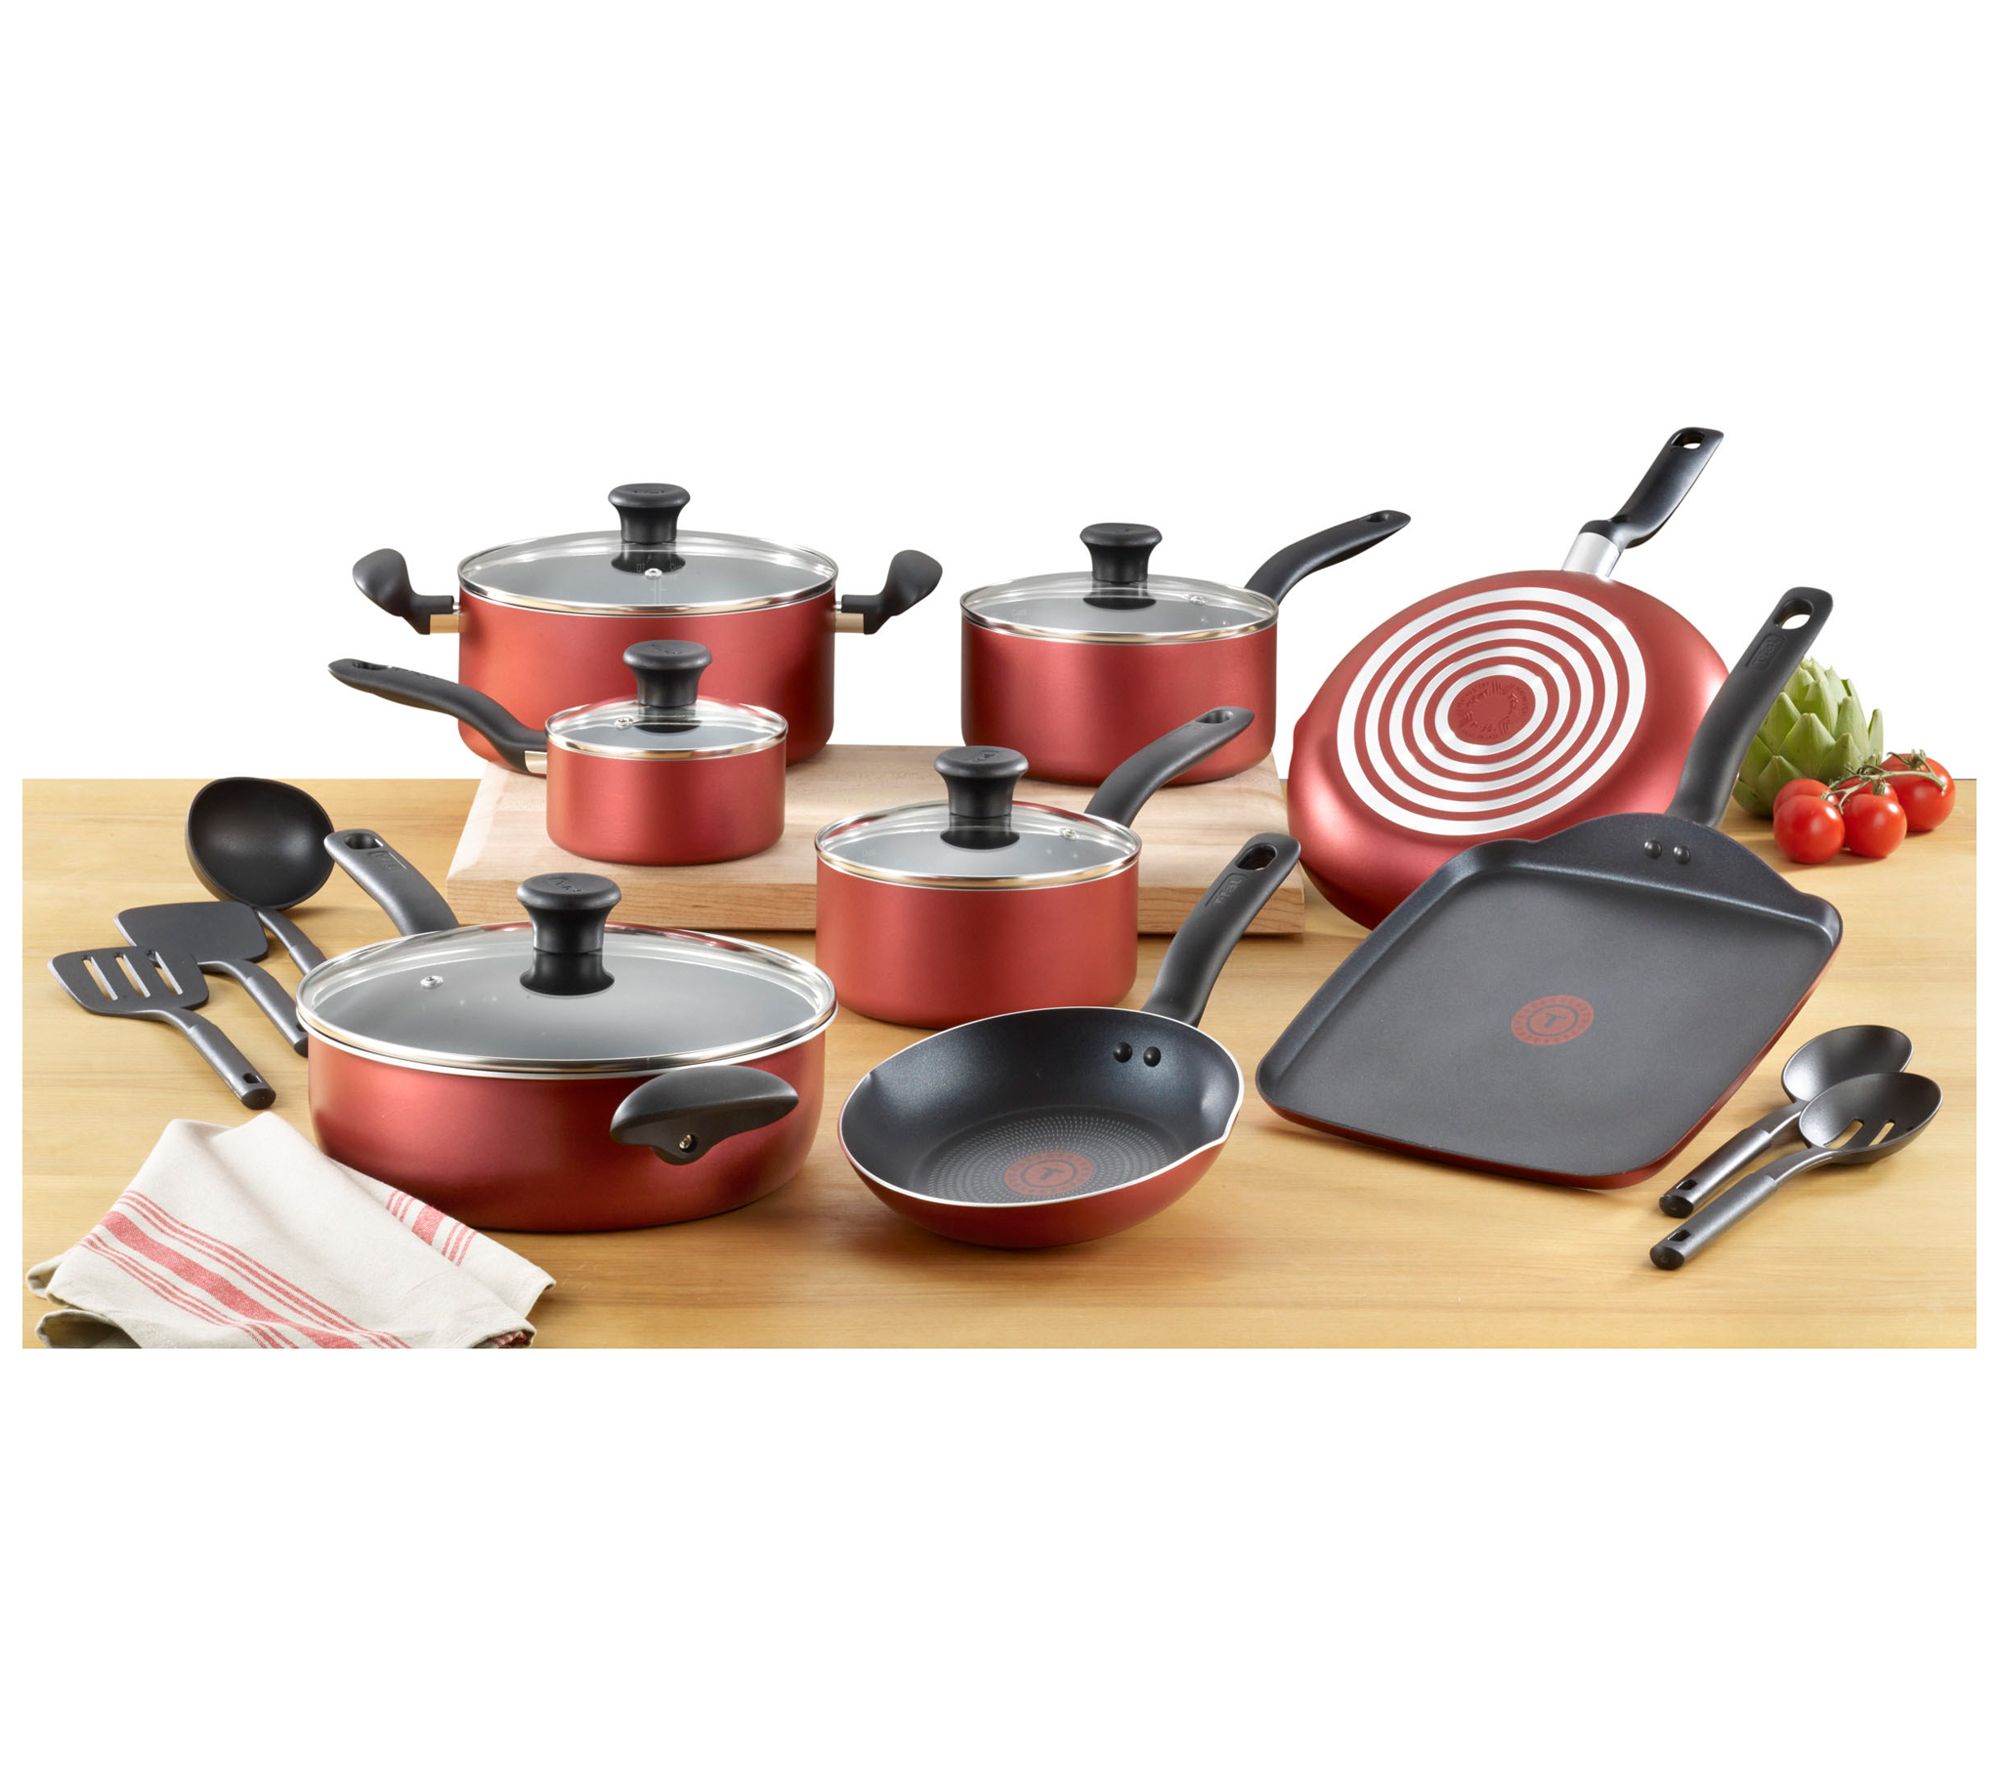 Yes, You Can Score Tefal Cookware Sets With A 40% Discount